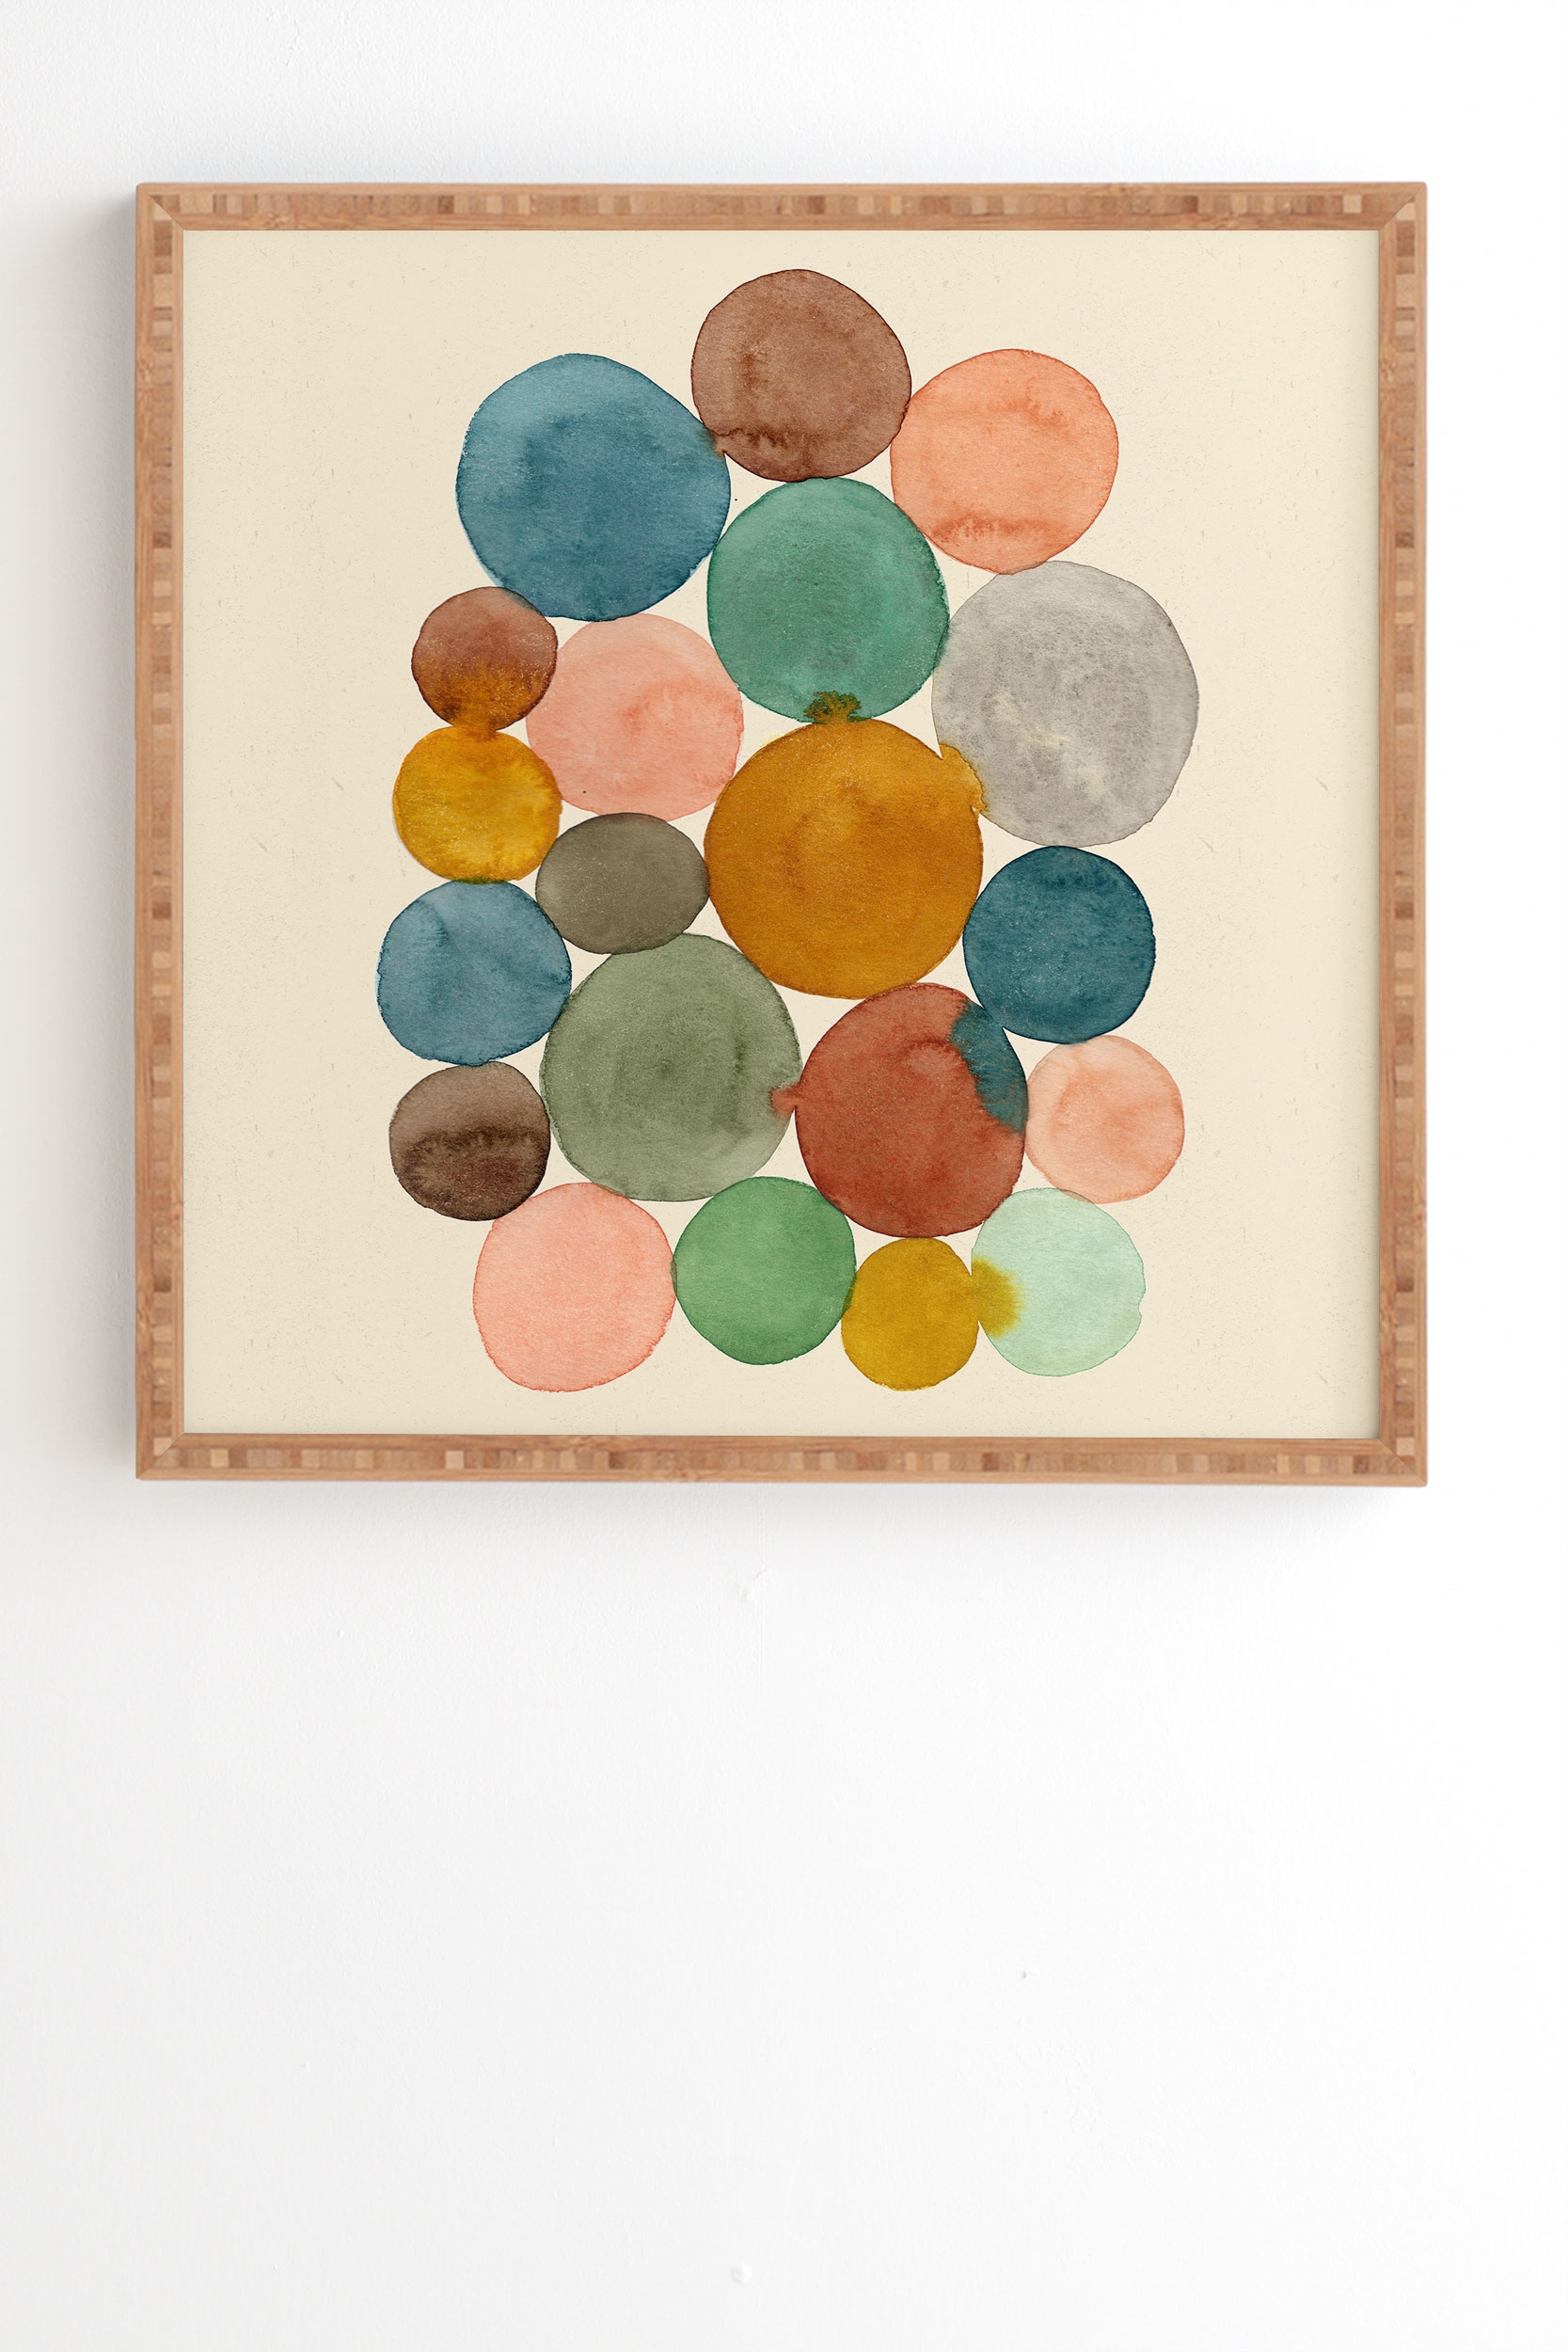 Connected Dots by Pauline Stanley - Framed Wall Art Bamboo 12" x 12" - Image 1